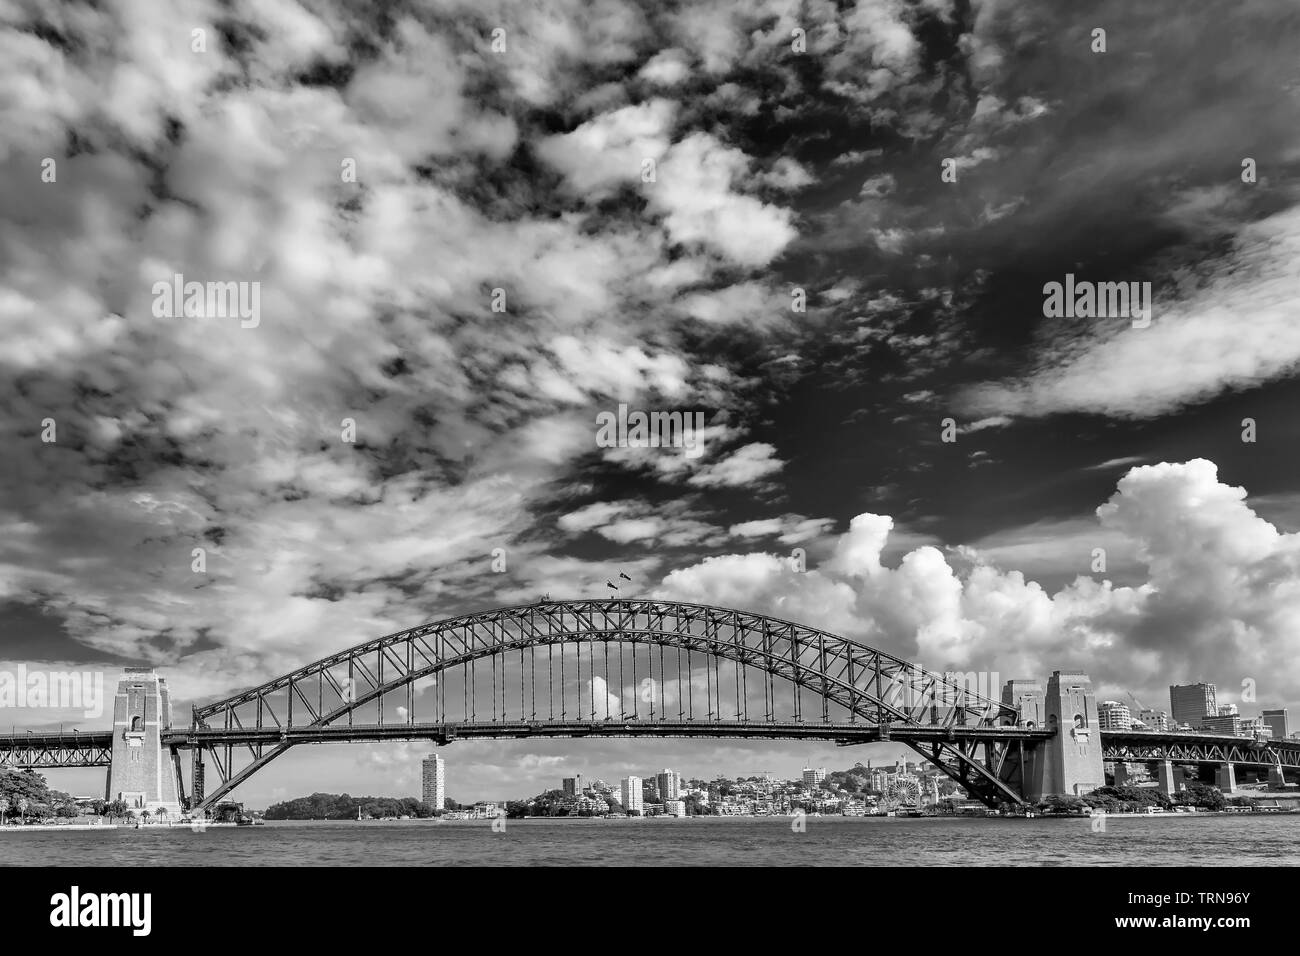 Beautiful black and white view of the Sydney Harbour Bridge, Australia, against a dramatic sky Stock Photo